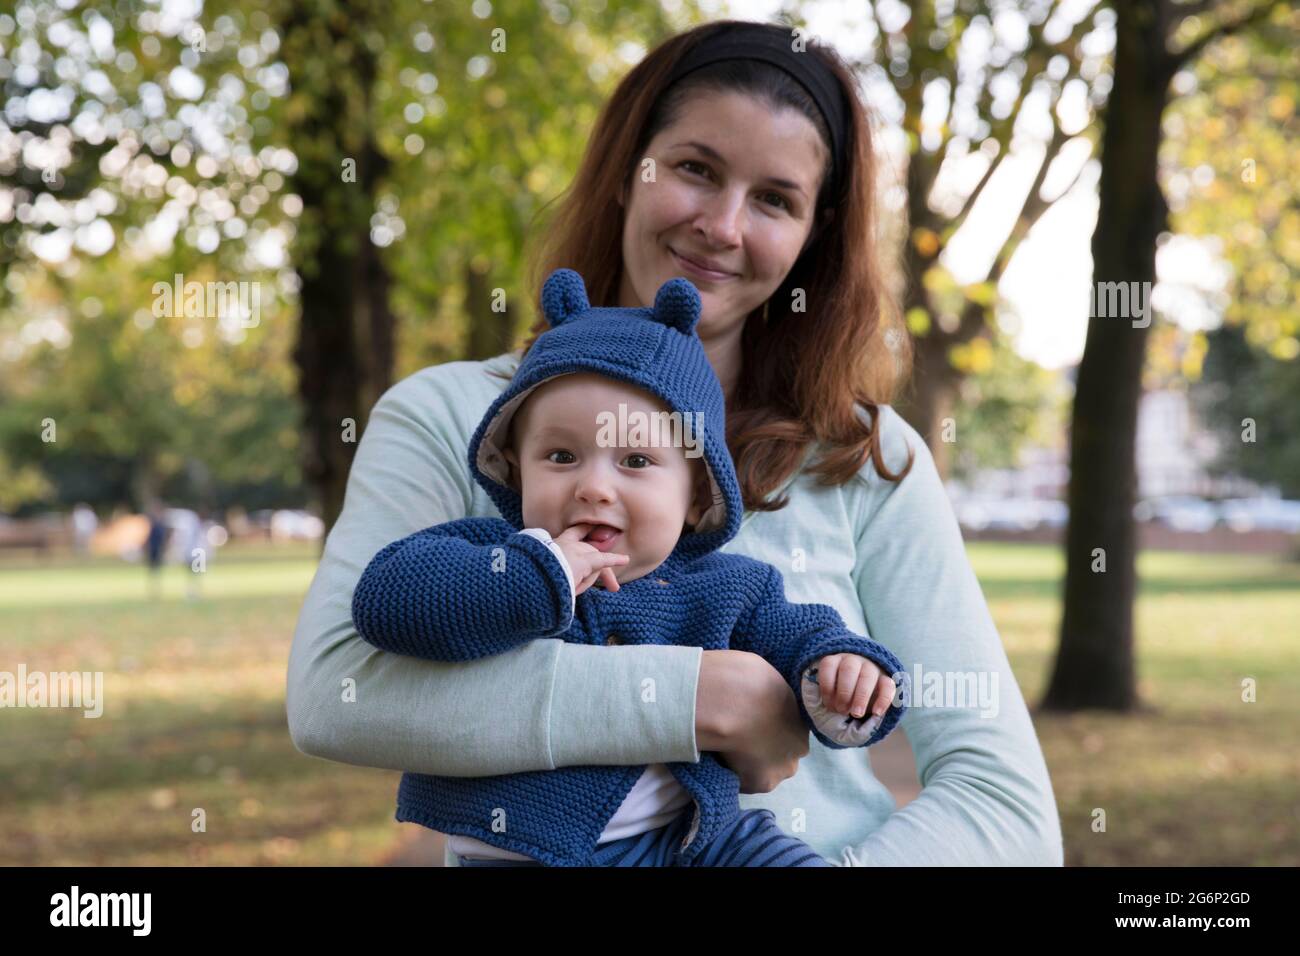 A woman holding her baby in a park Stock Photo